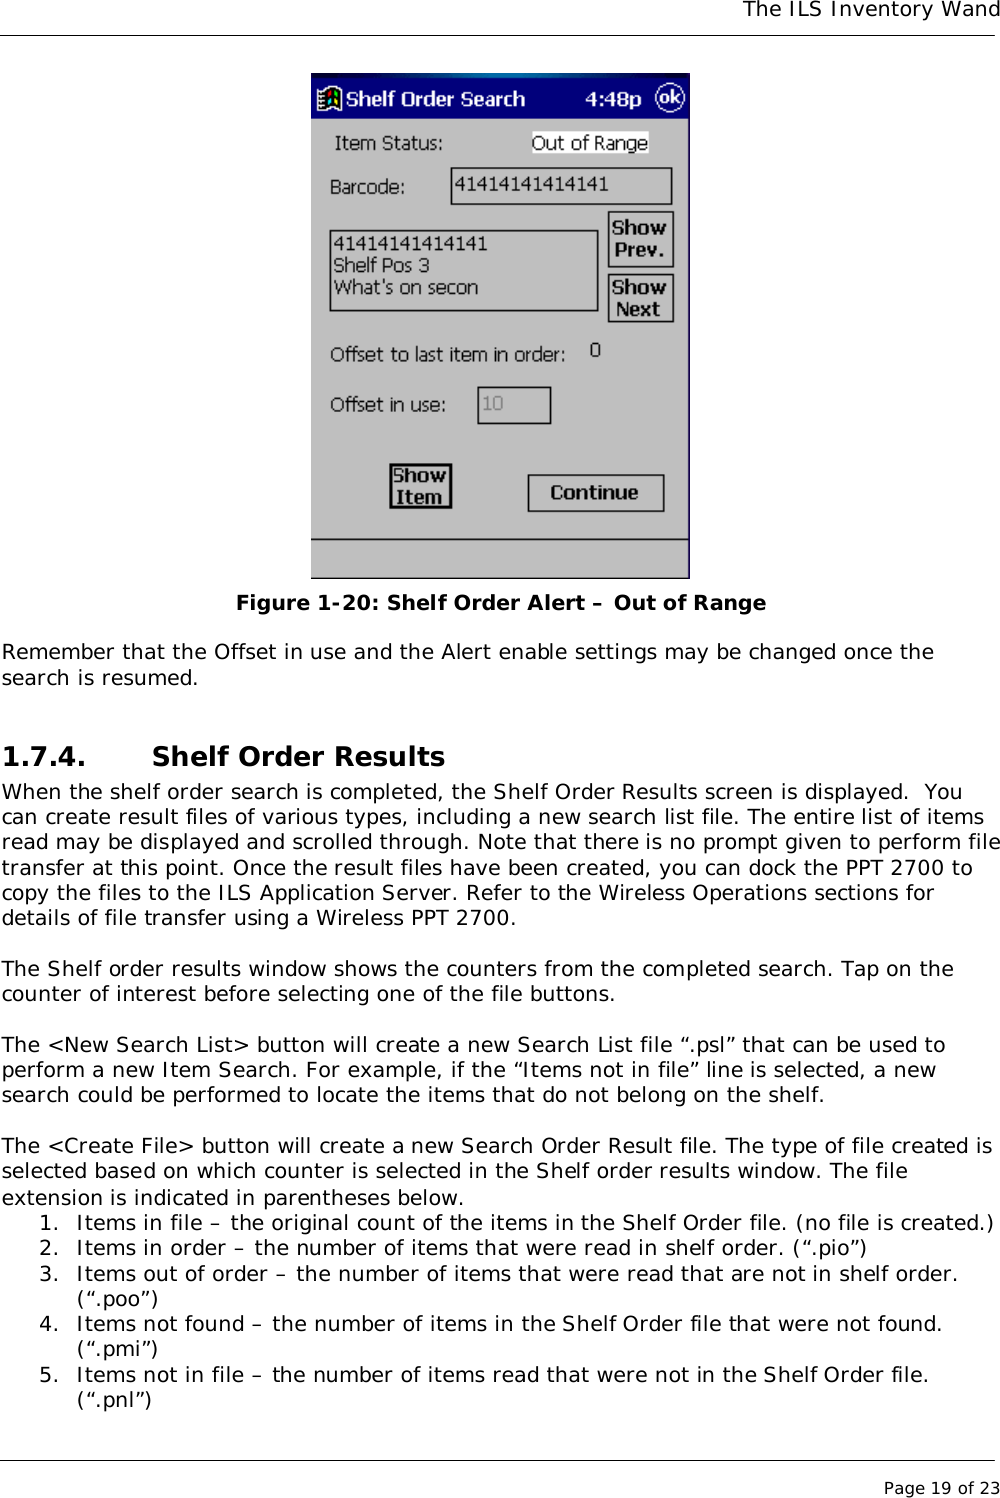 The ILS Inventory WandPage 19 of 23Figure 1-20: Shelf Order Alert – Out of RangeRemember that the Offset in use and the Alert enable settings may be changed once thesearch is resumed.1.7.4. Shelf Order ResultsWhen the shelf order search is completed, the Shelf Order Results screen is displayed.  Youcan create result files of various types, including a new search list file. The entire list of itemsread may be displayed and scrolled through. Note that there is no prompt given to perform filetransfer at this point. Once the result files have been created, you can dock the PPT 2700 tocopy the files to the ILS Application Server. Refer to the Wireless Operations sections fordetails of file transfer using a Wireless PPT 2700.The Shelf order results window shows the counters from the completed search. Tap on thecounter of interest before selecting one of the file buttons.The &lt;New Search List&gt; button will create a new Search List file “.psl” that can be used toperform a new Item Search. For example, if the “Items not in file” line is selected, a newsearch could be performed to locate the items that do not belong on the shelf.The &lt;Create File&gt; button will create a new Search Order Result file. The type of file created isselected based on which counter is selected in the Shelf order results window. The fileextension is indicated in parentheses below.1. Items in file – the original count of the items in the Shelf Order file. (no file is created.)2. Items in order – the number of items that were read in shelf order. (“.pio”)3. Items out of order – the number of items that were read that are not in shelf order.(“.poo”)4. Items not found – the number of items in the Shelf Order file that were not found.(“.pmi”)5. Items not in file – the number of items read that were not in the Shelf Order file.(“.pnl”)